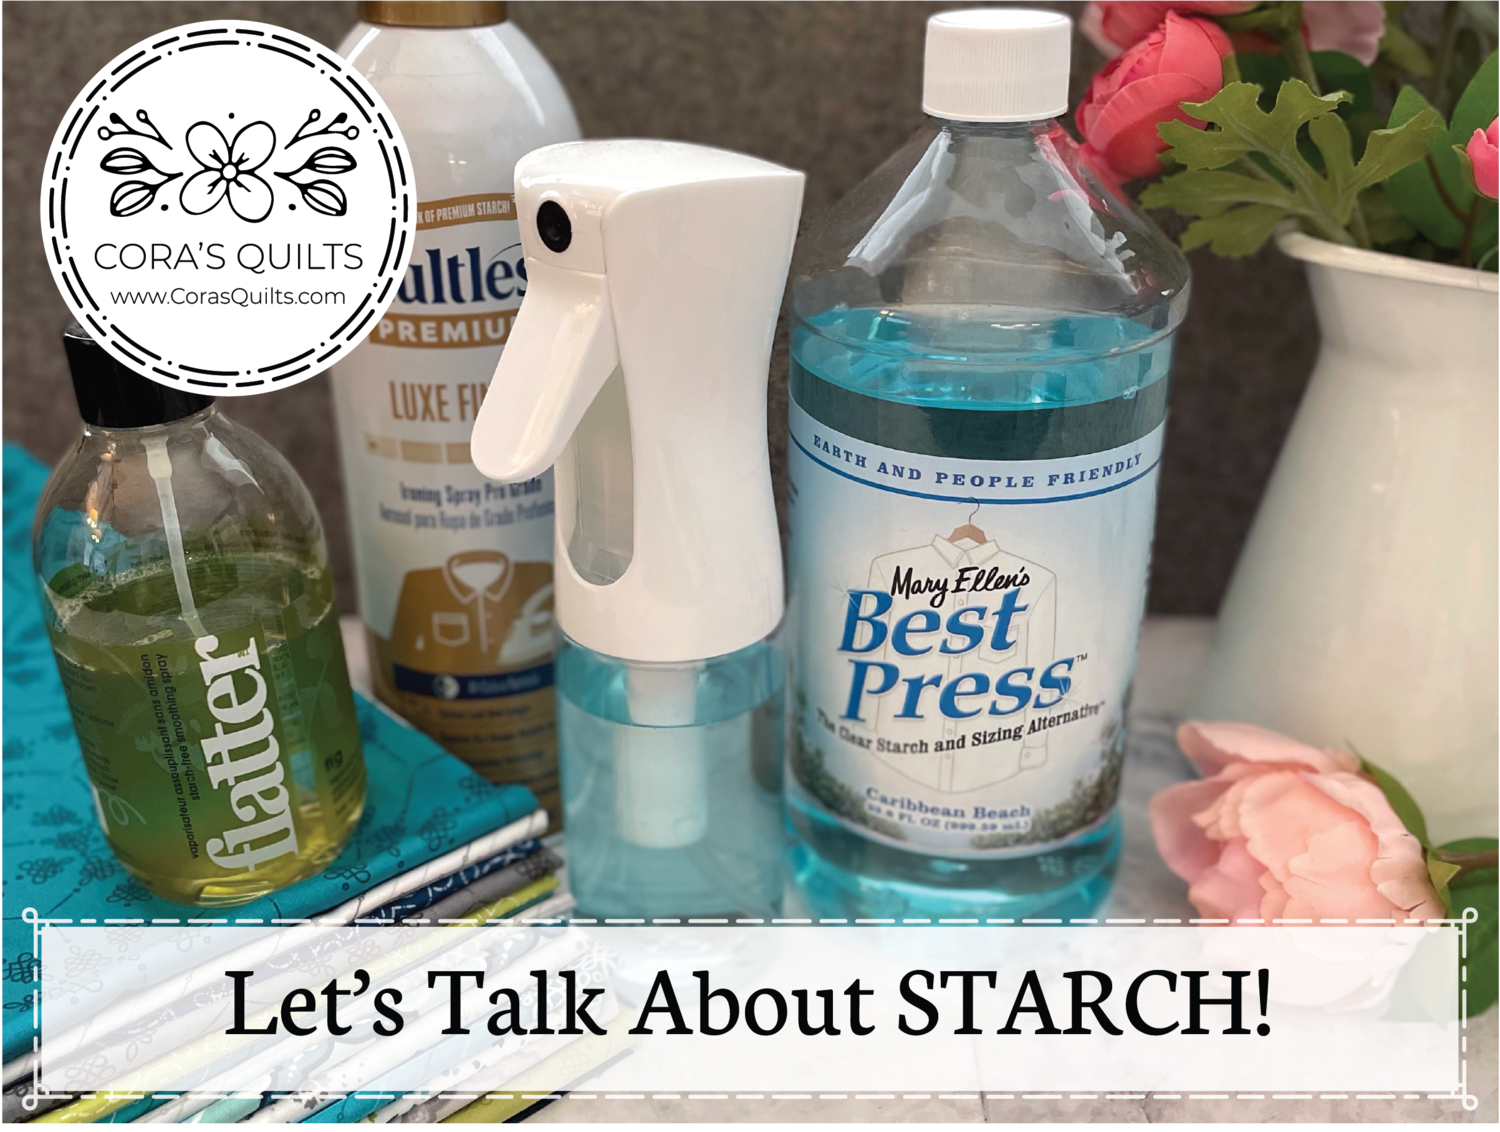 Let's talk about starch! — Cora's Quilts by Shelley Cavanna